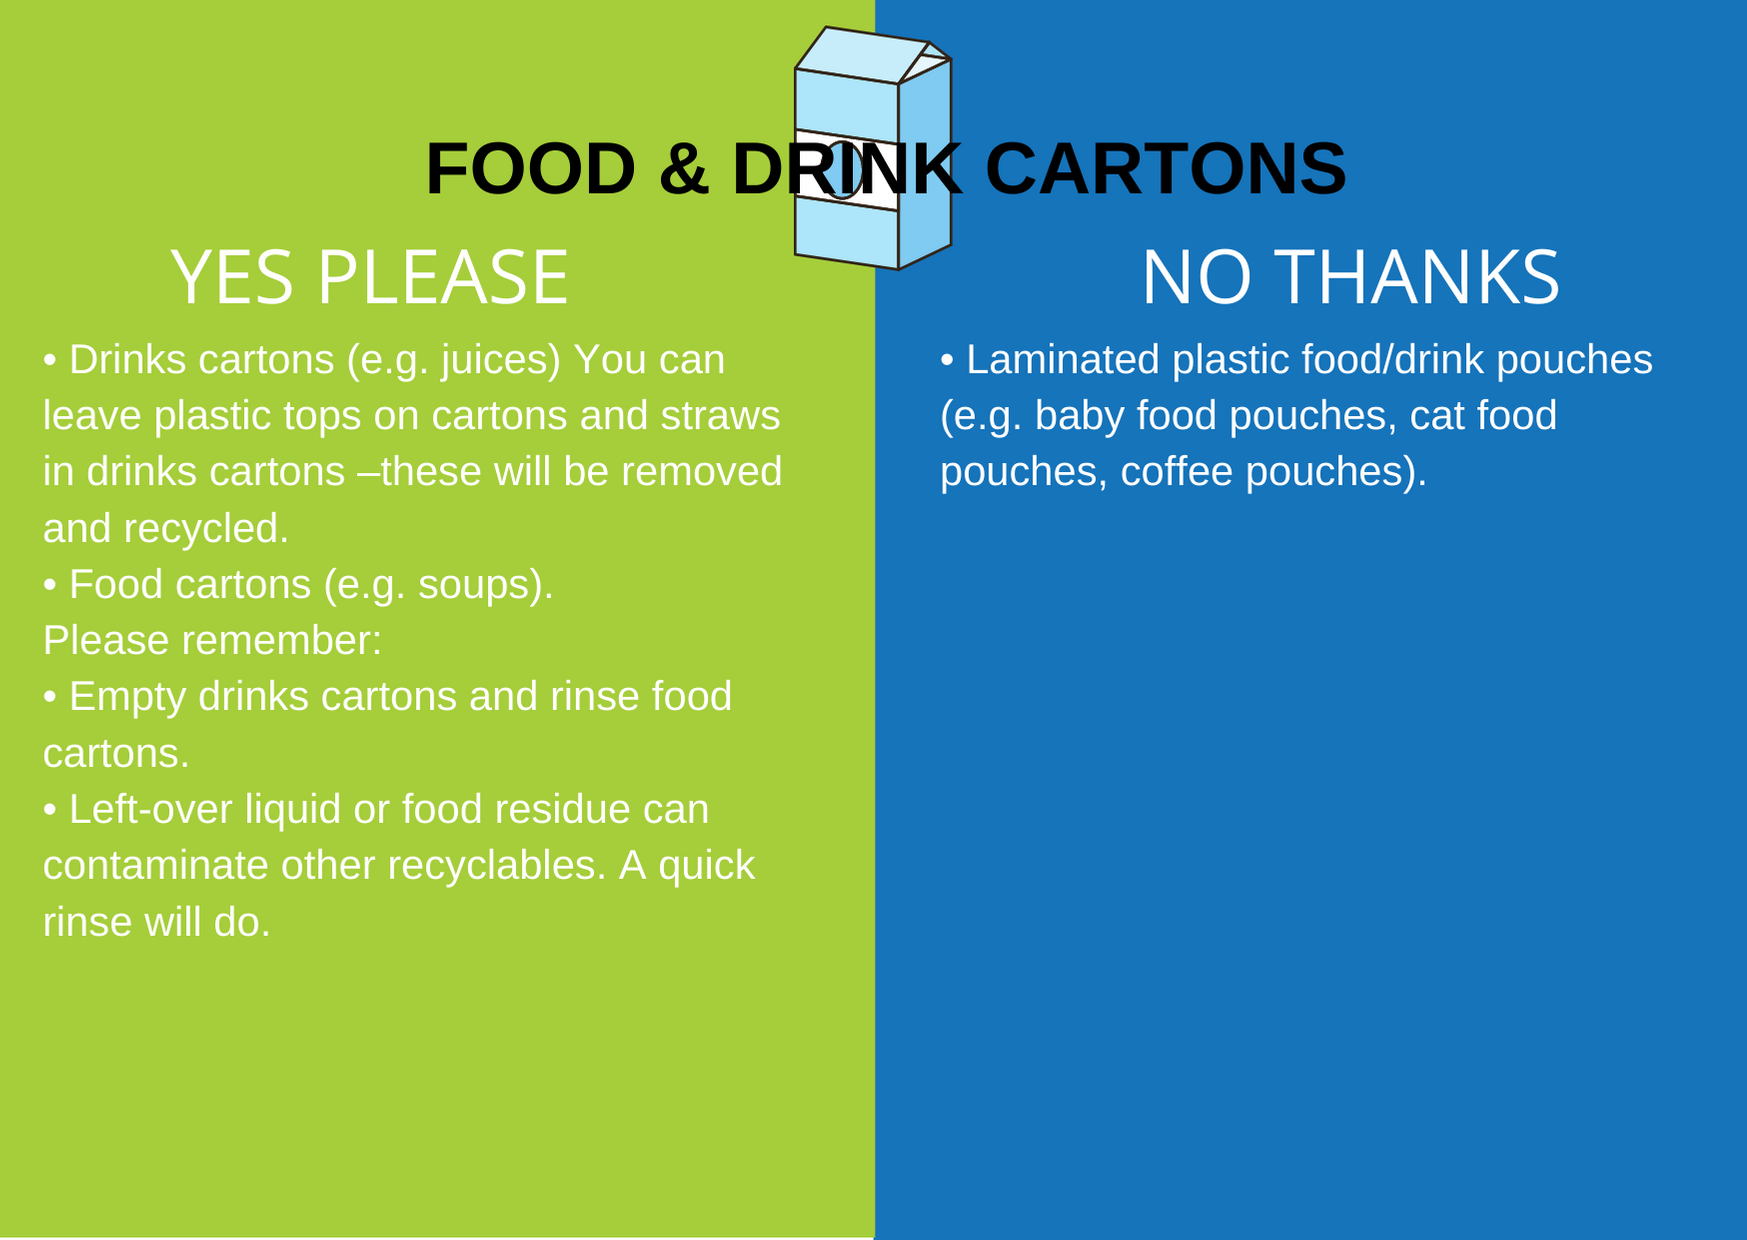 What food and drink cartons can i recycle